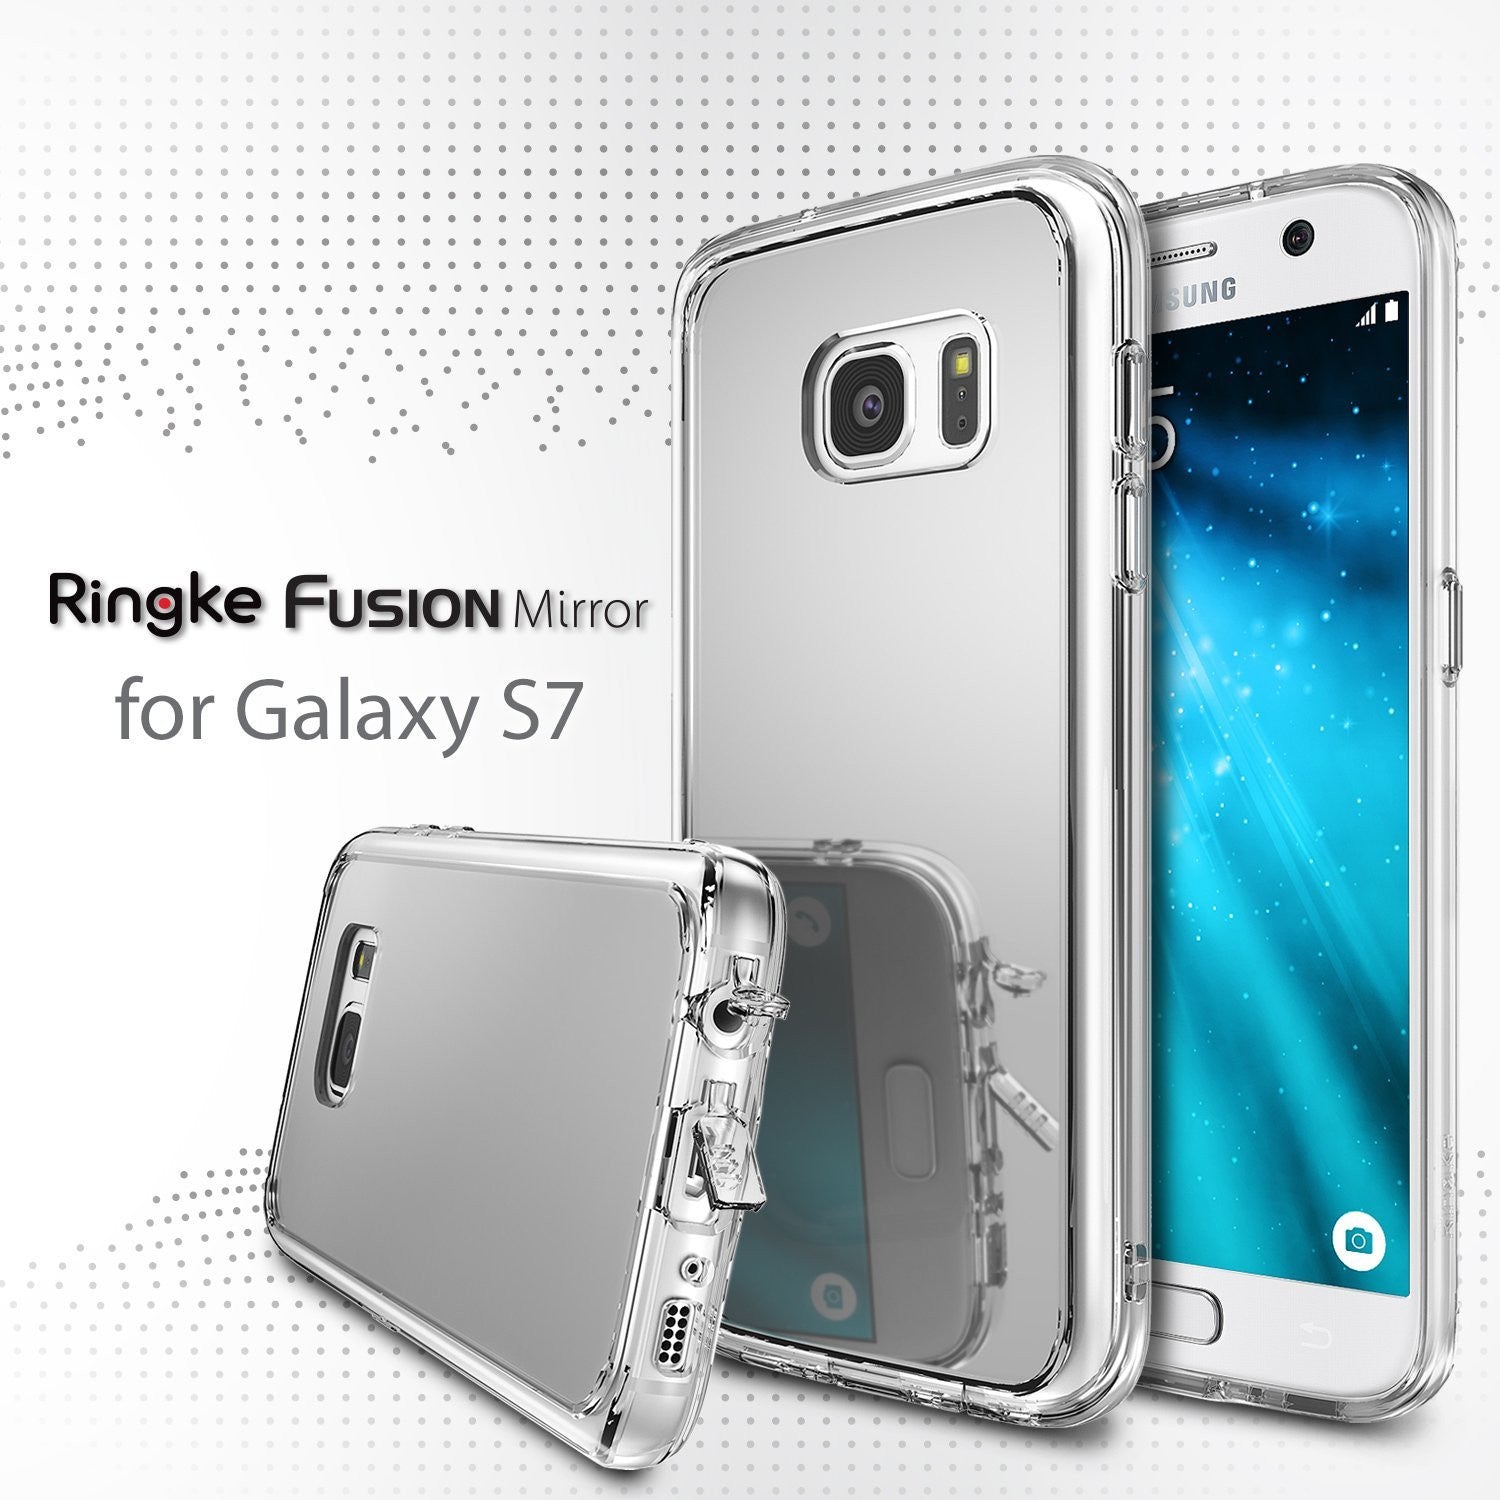 ringke mirror back cover case for galaxy s7